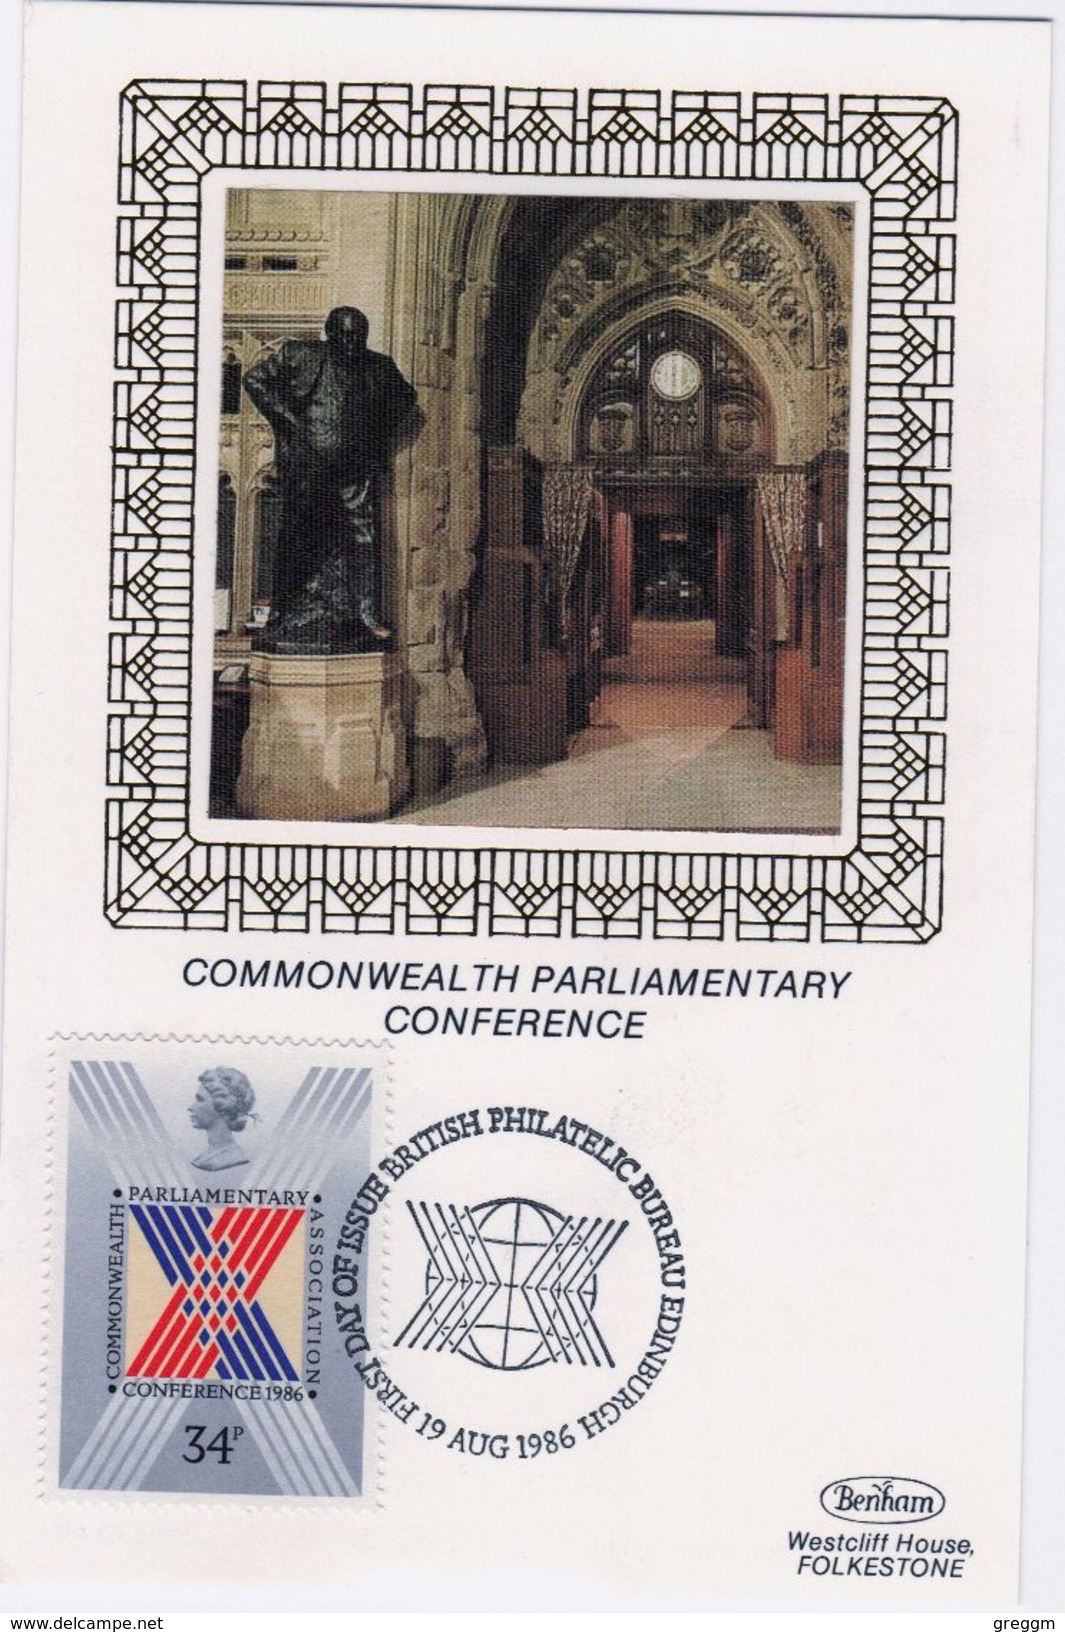 Great Britain First Day Benham Silk Postcards To Celebrate Commonwealth Conference 1986 - 1981-1990 Decimal Issues